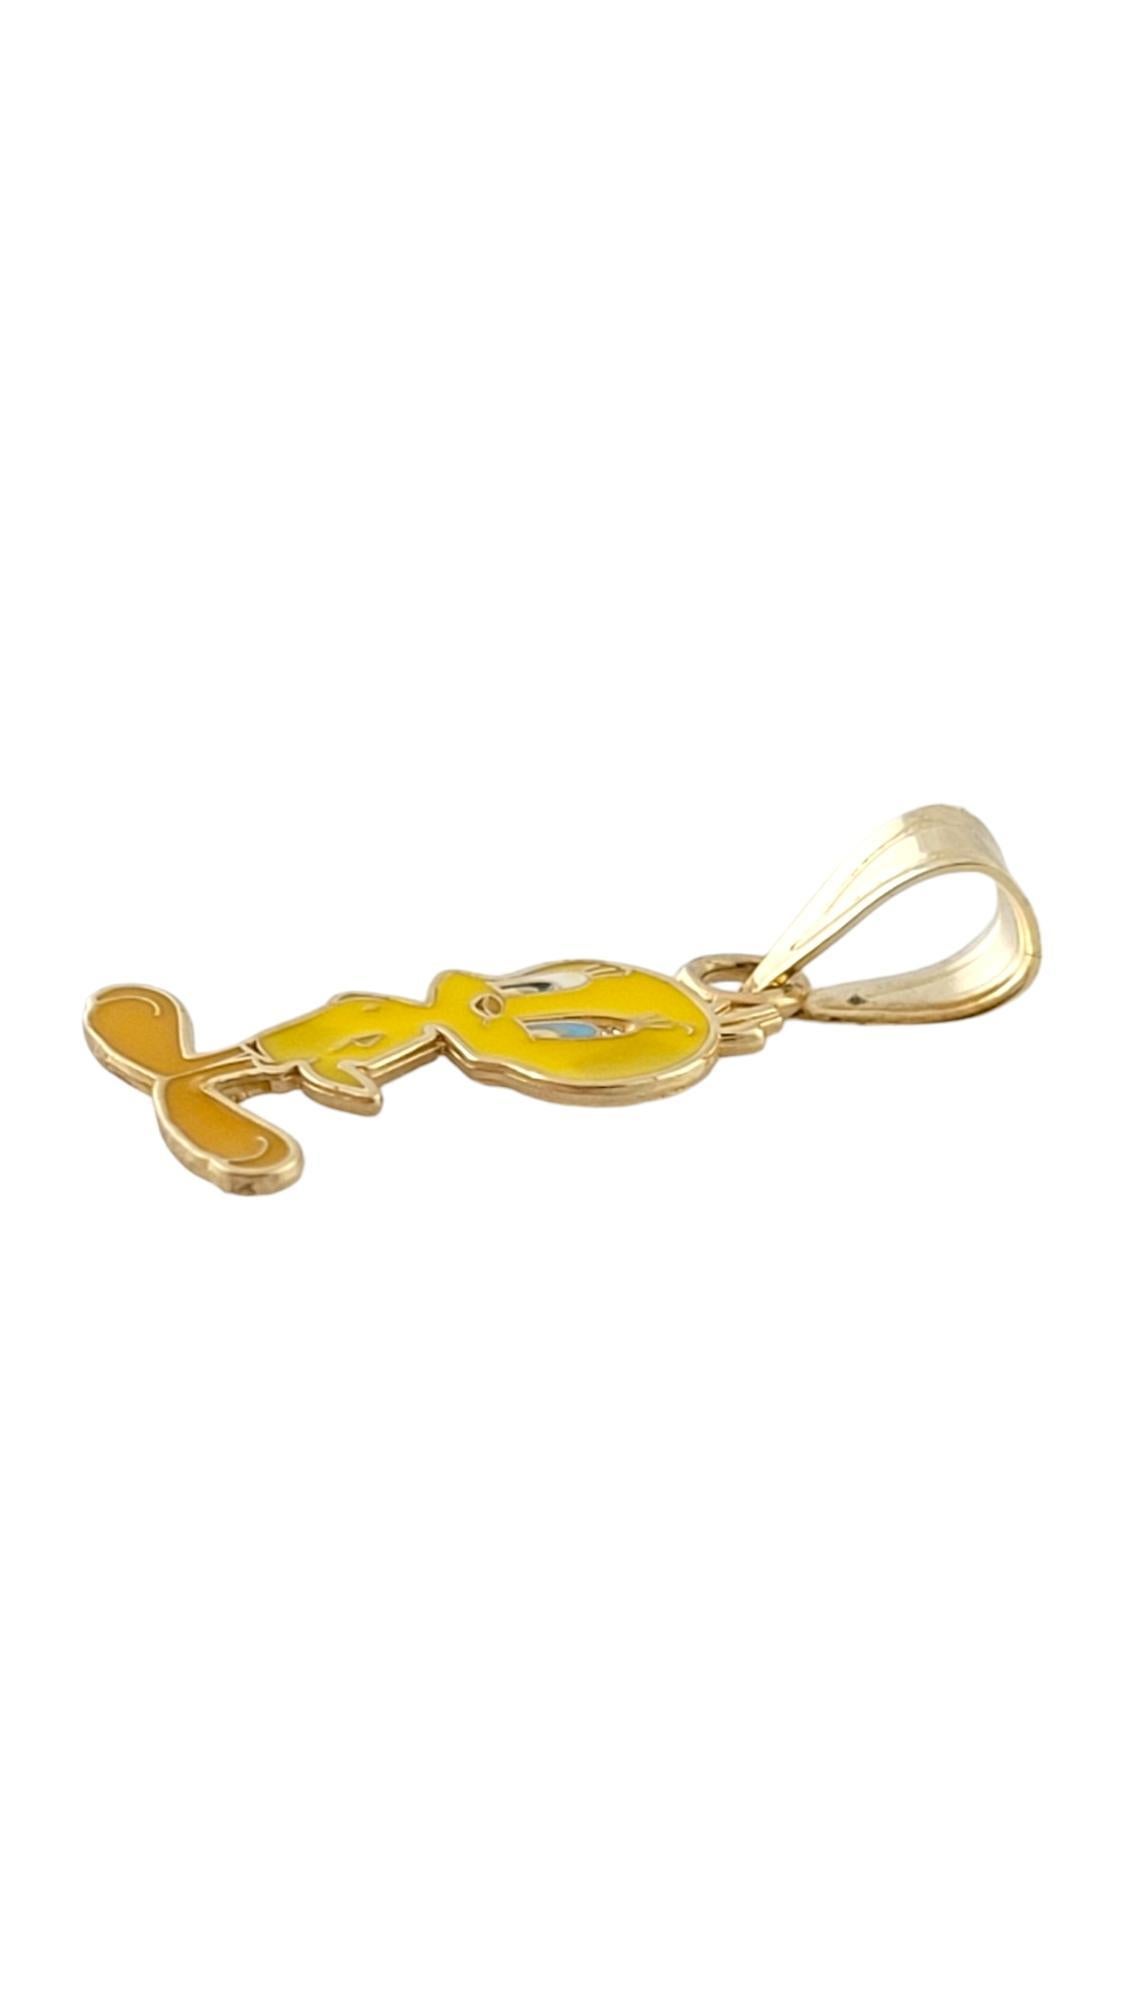 Vintage 14K Yellow Gold Tweety Bird Charm

This adorable Tweety Bird charm is crafted from 14K yellow gold and would make the perfect gift for yourself or another cartoon lover!

Size: 15.0mm X 9.02mm x 0.68mm
Length w/ bail: 19.93mm

Weight: 0.3